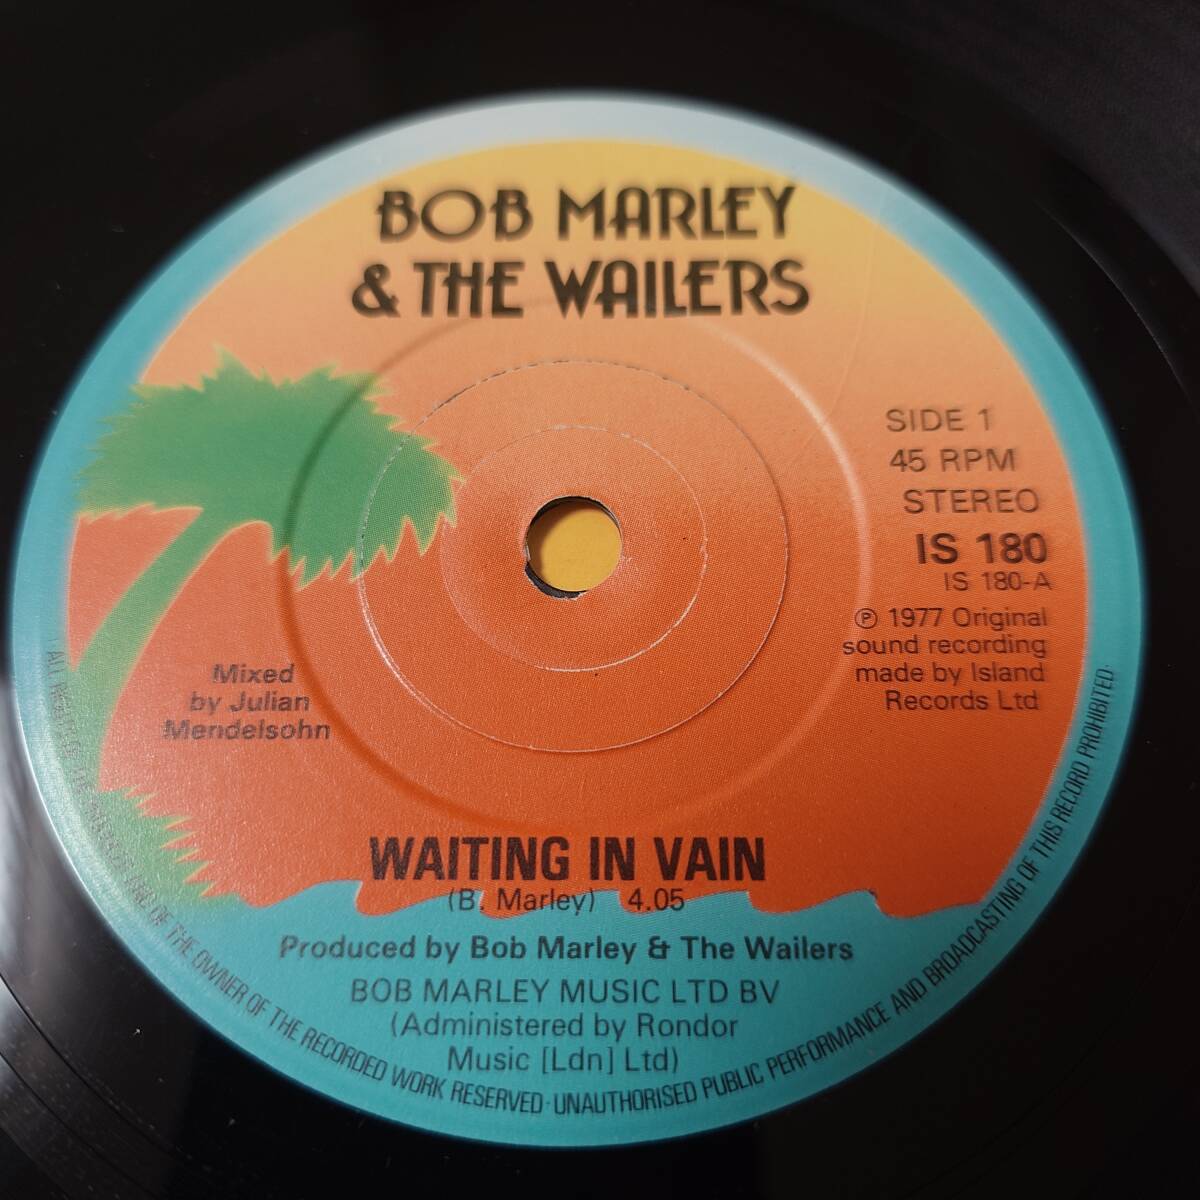 Bob Marley & The Wailers - Waiting In Vain / Blackman Redemption // Island Records 7inch / Roots_画像3